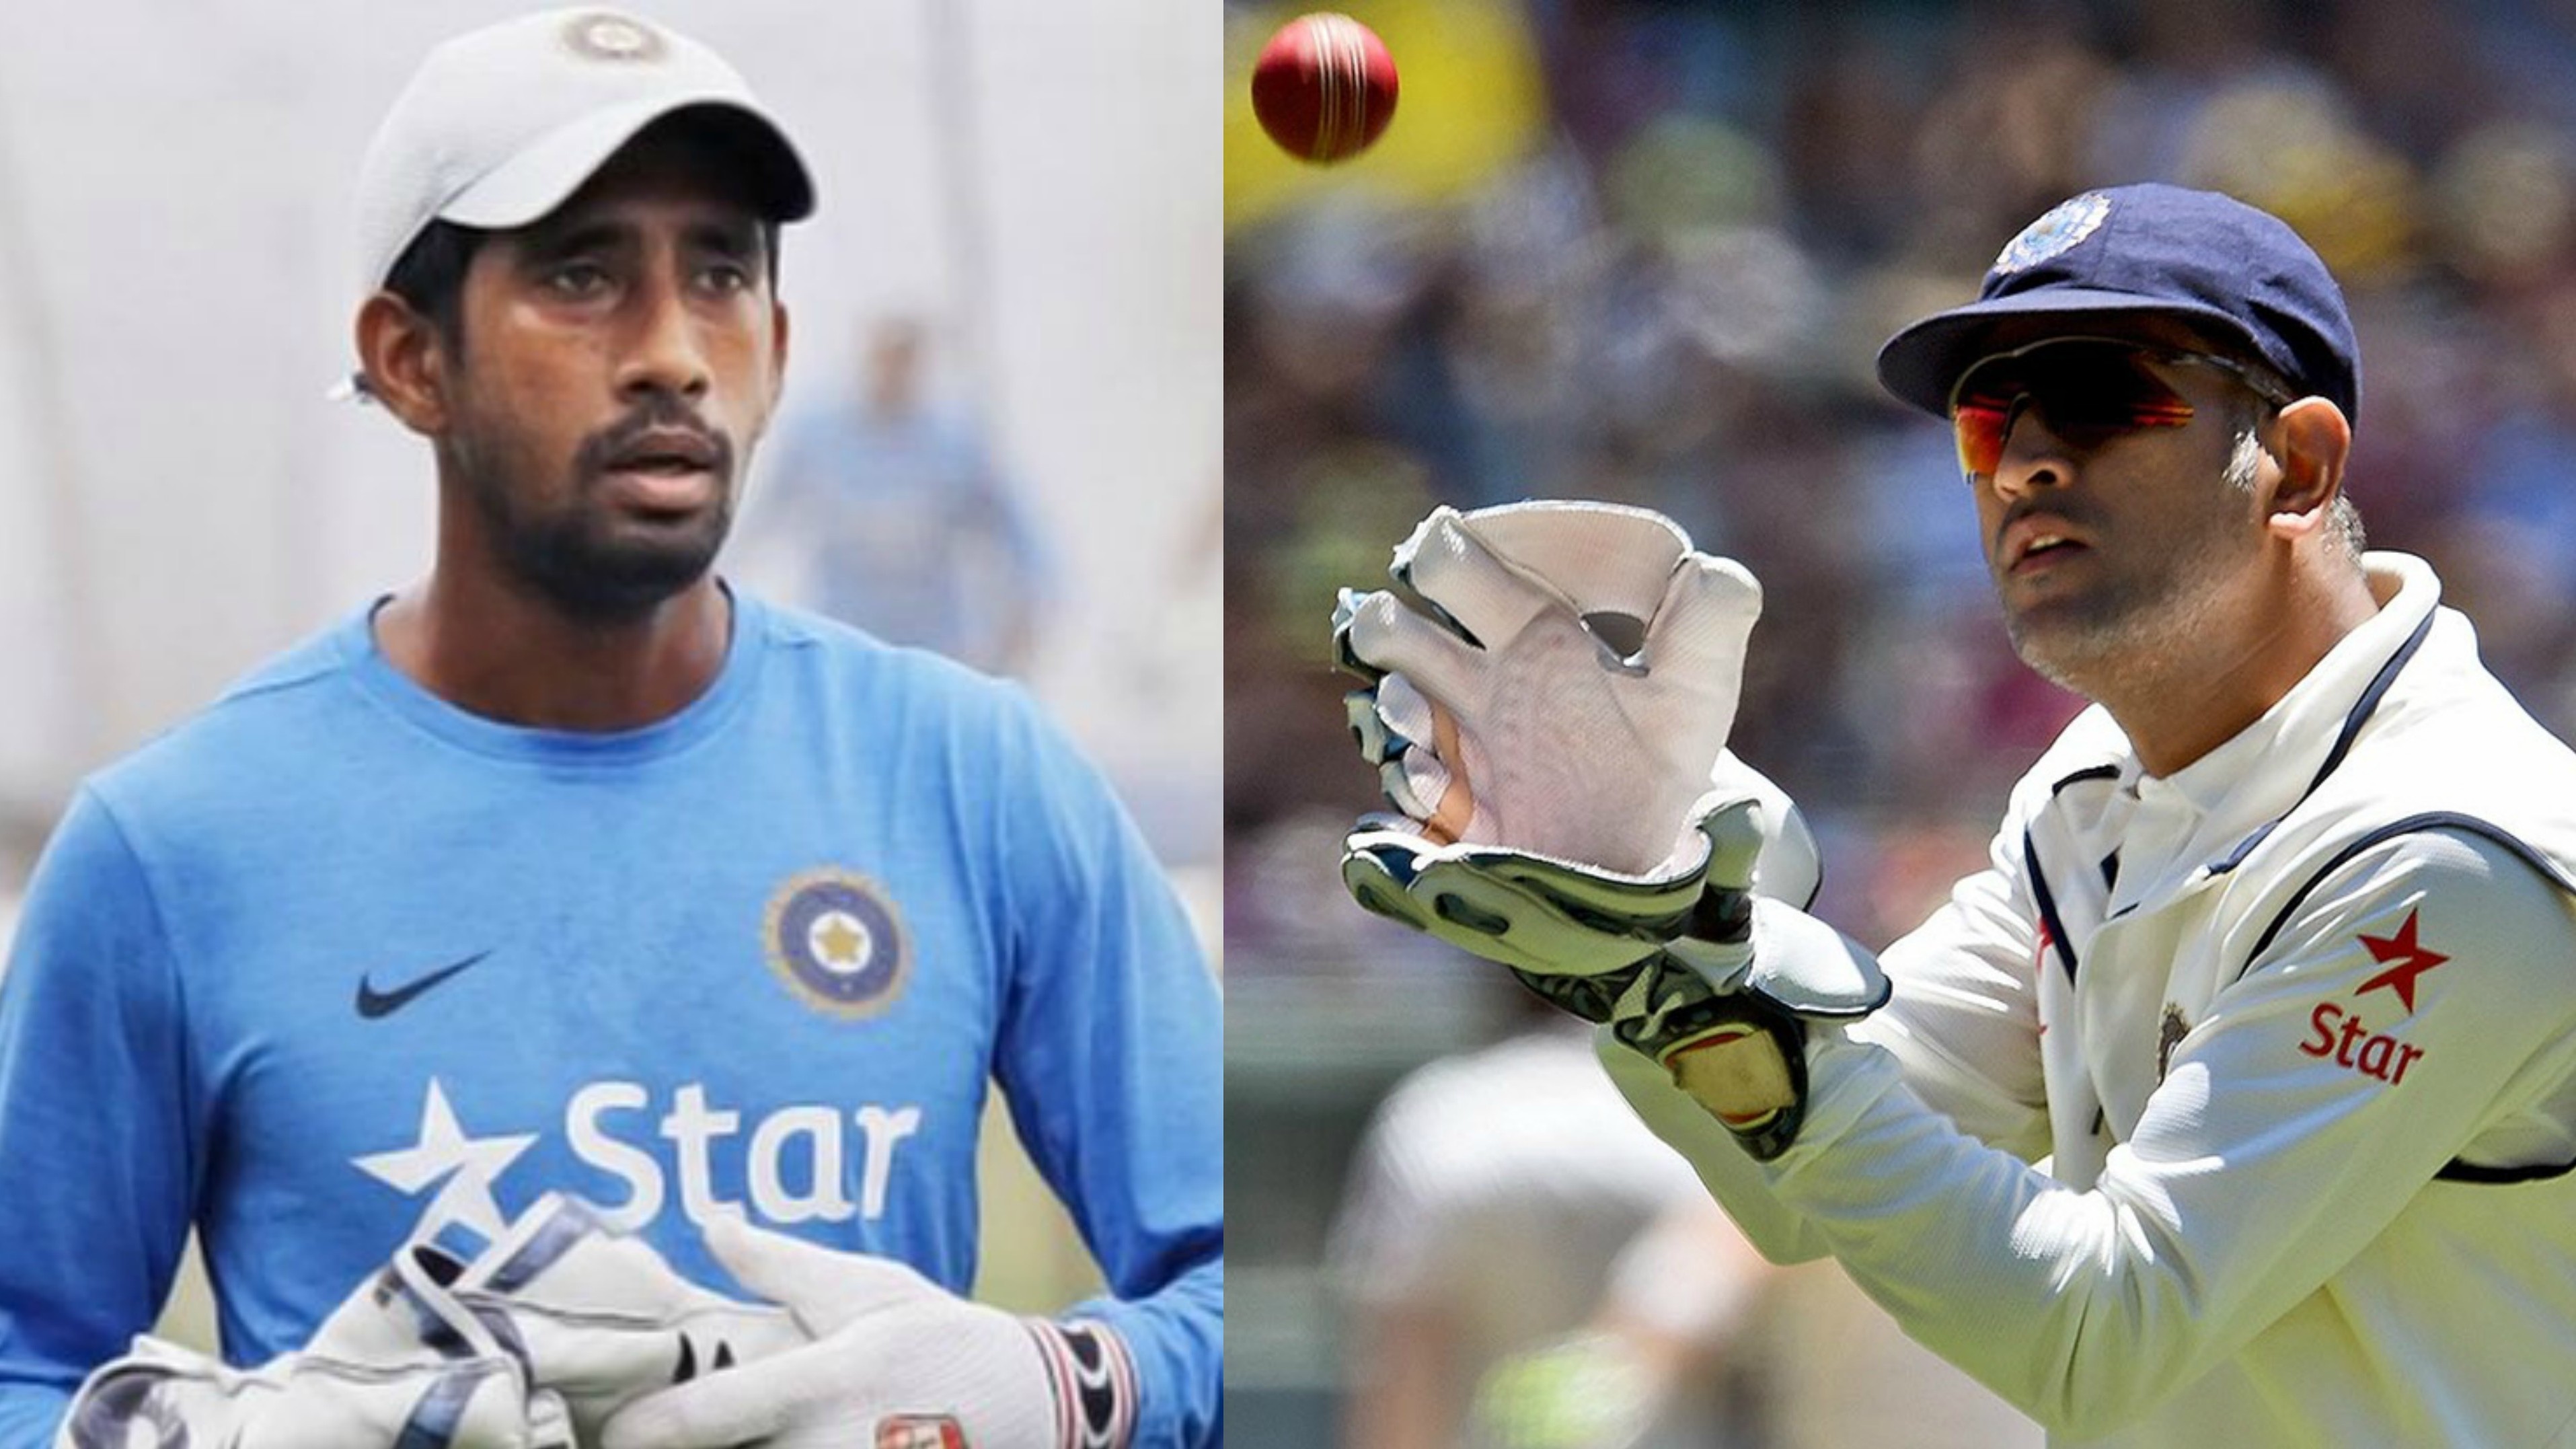 MS Dhoni was a more natural wicketkeeper when compared to others, says Wriddhiman Saha 